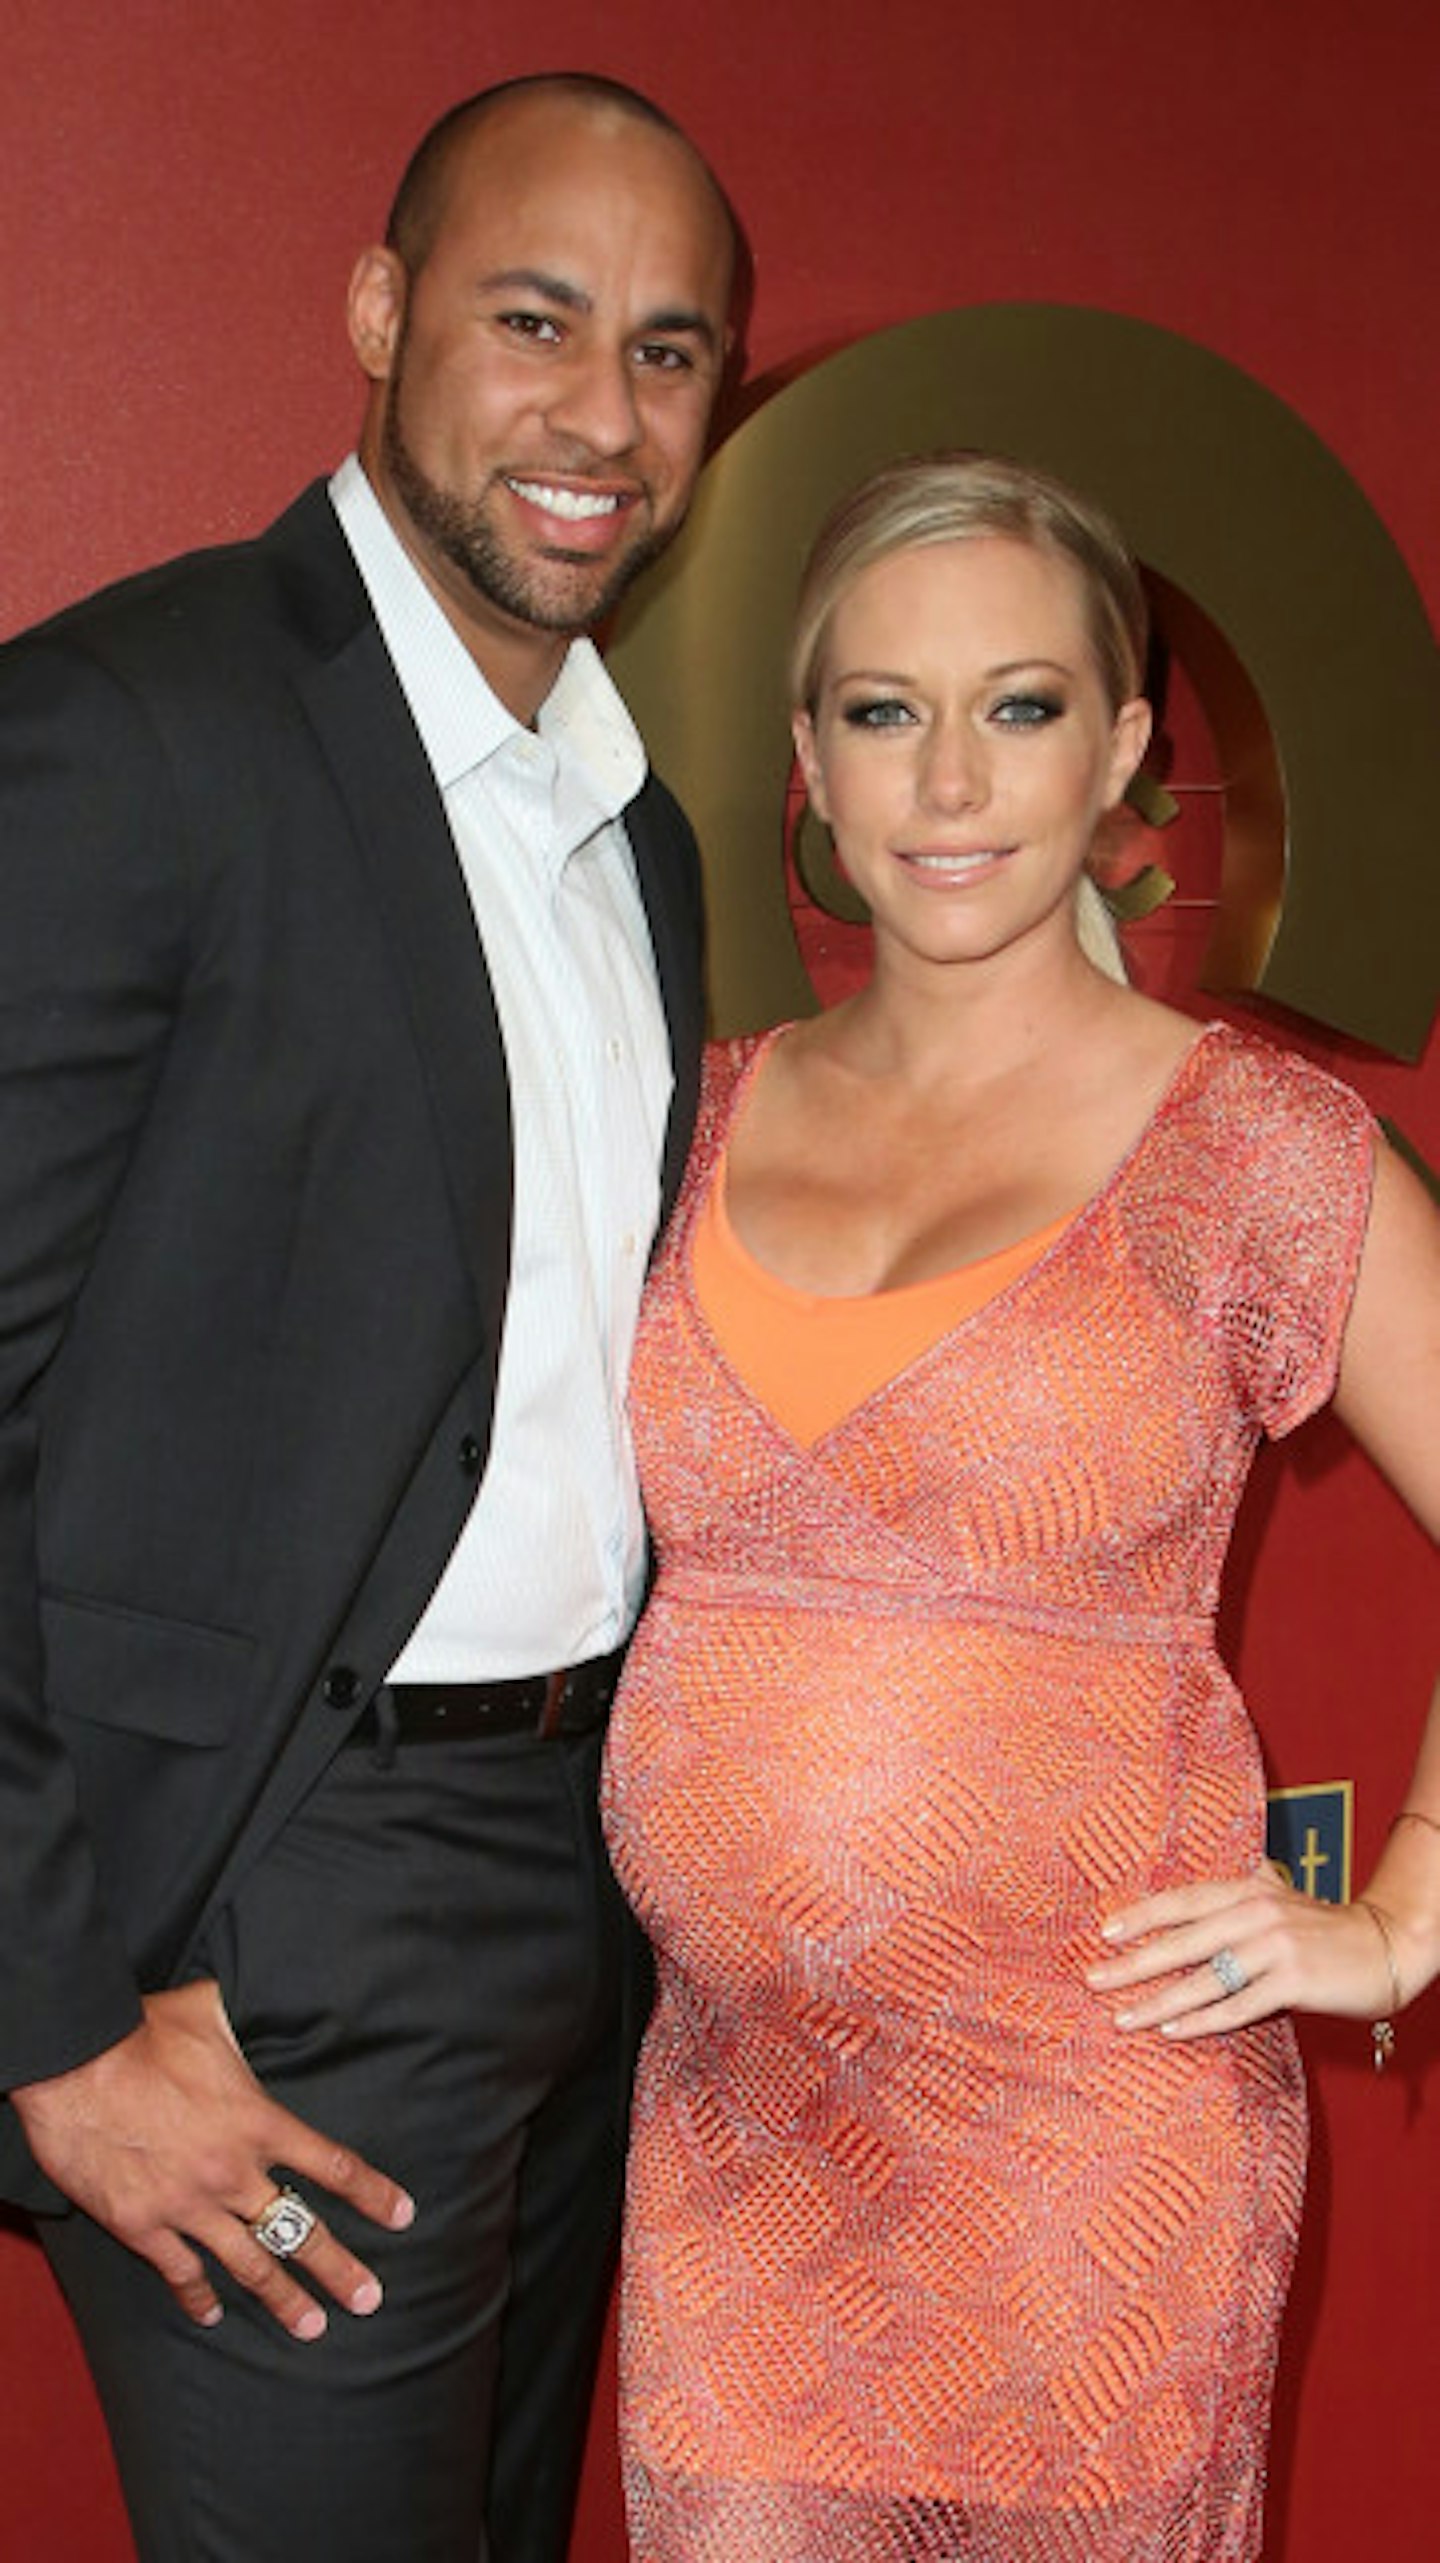 Hank cheated whilst Kendra was pregnant